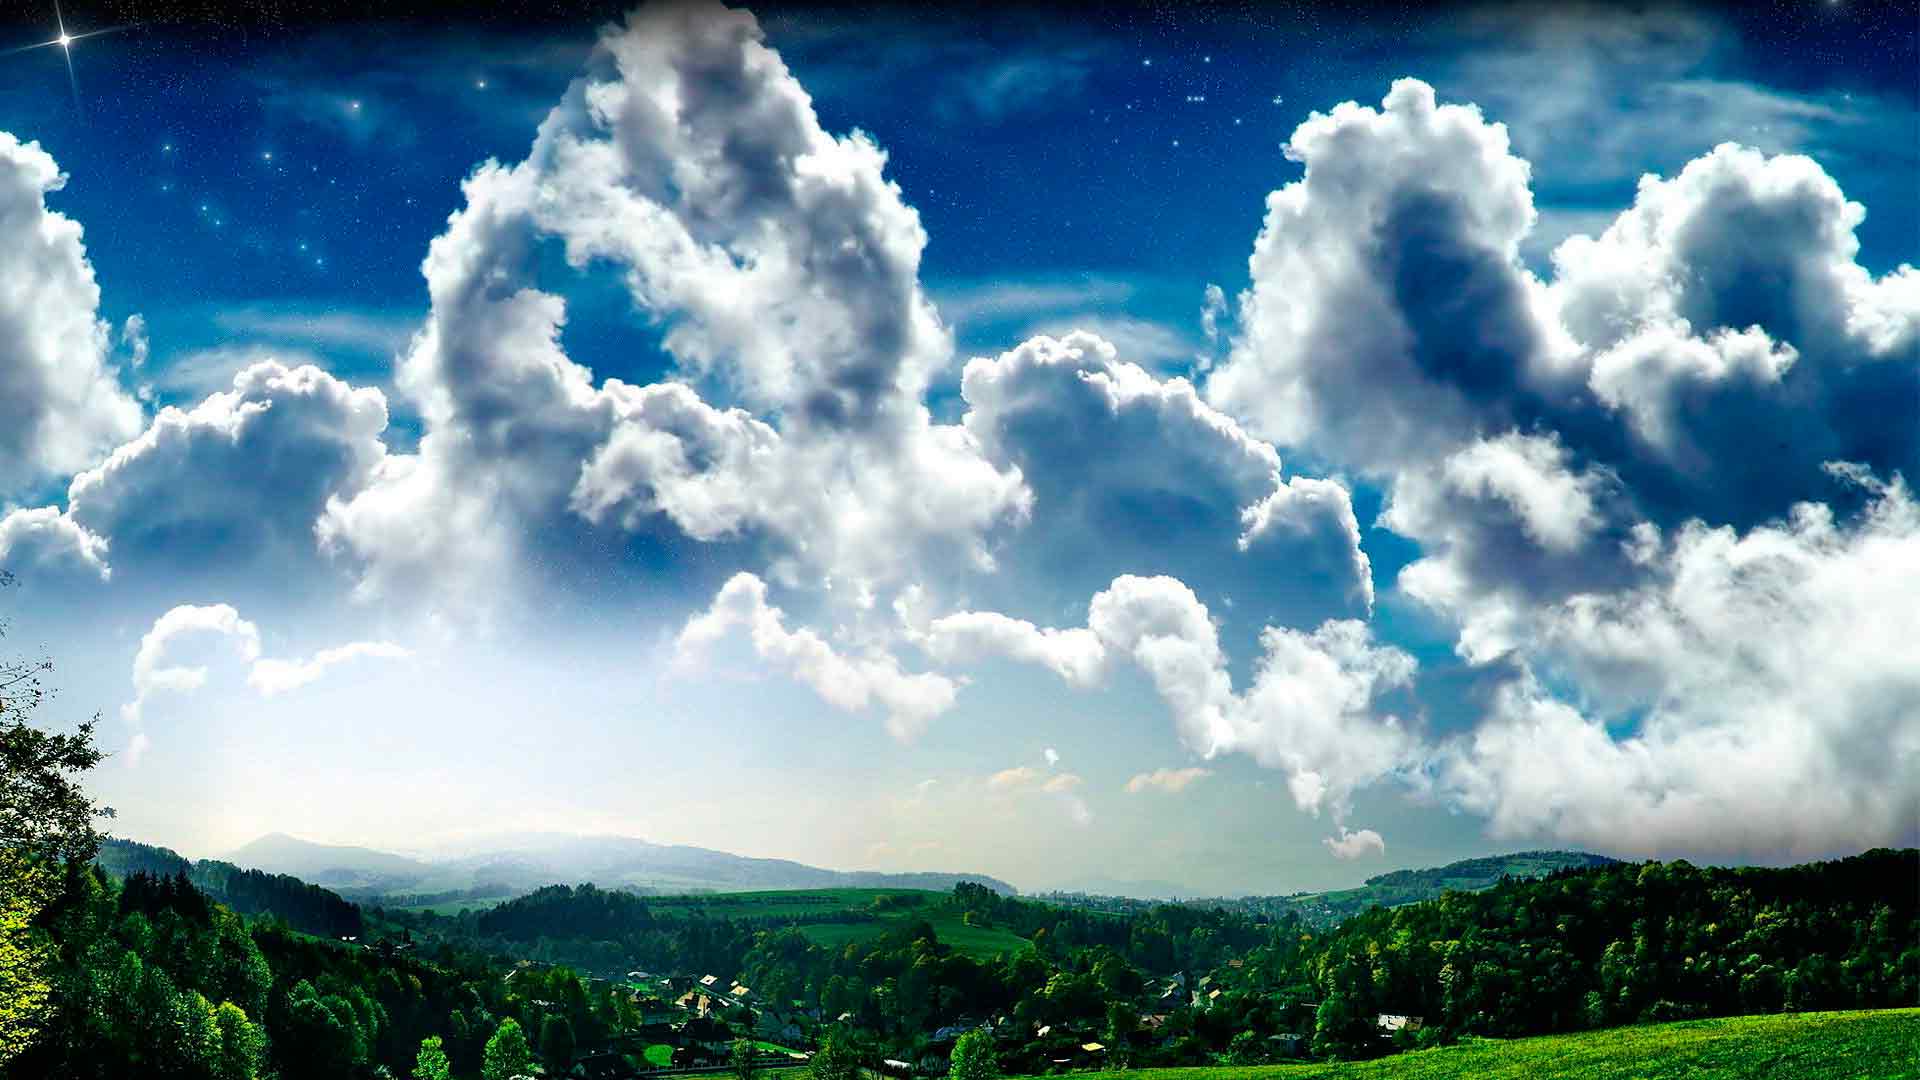 background sky images #10